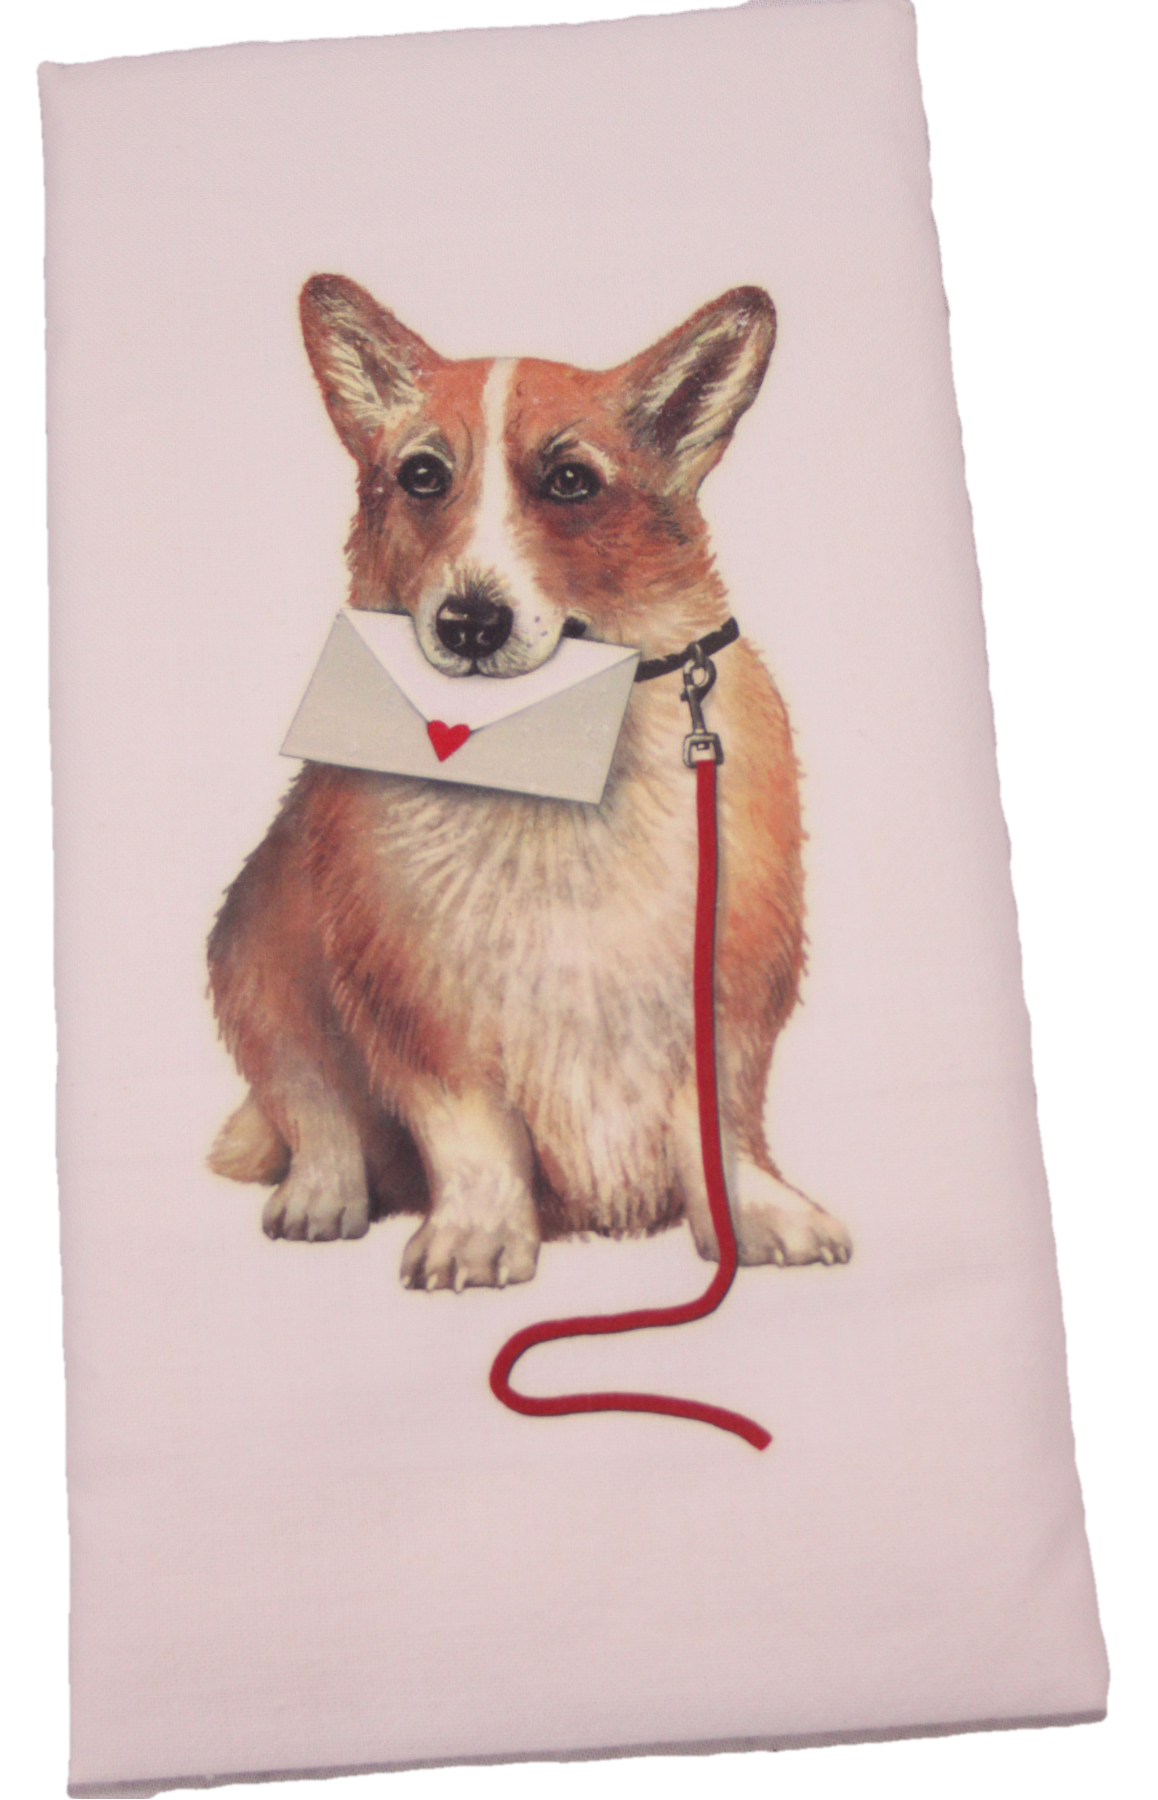 The flour sack dish towel is 100% white cotton. The actual size 30 X 30 inches. The towel has a printed design featuring a Corgi dog with an envelop with a heart.